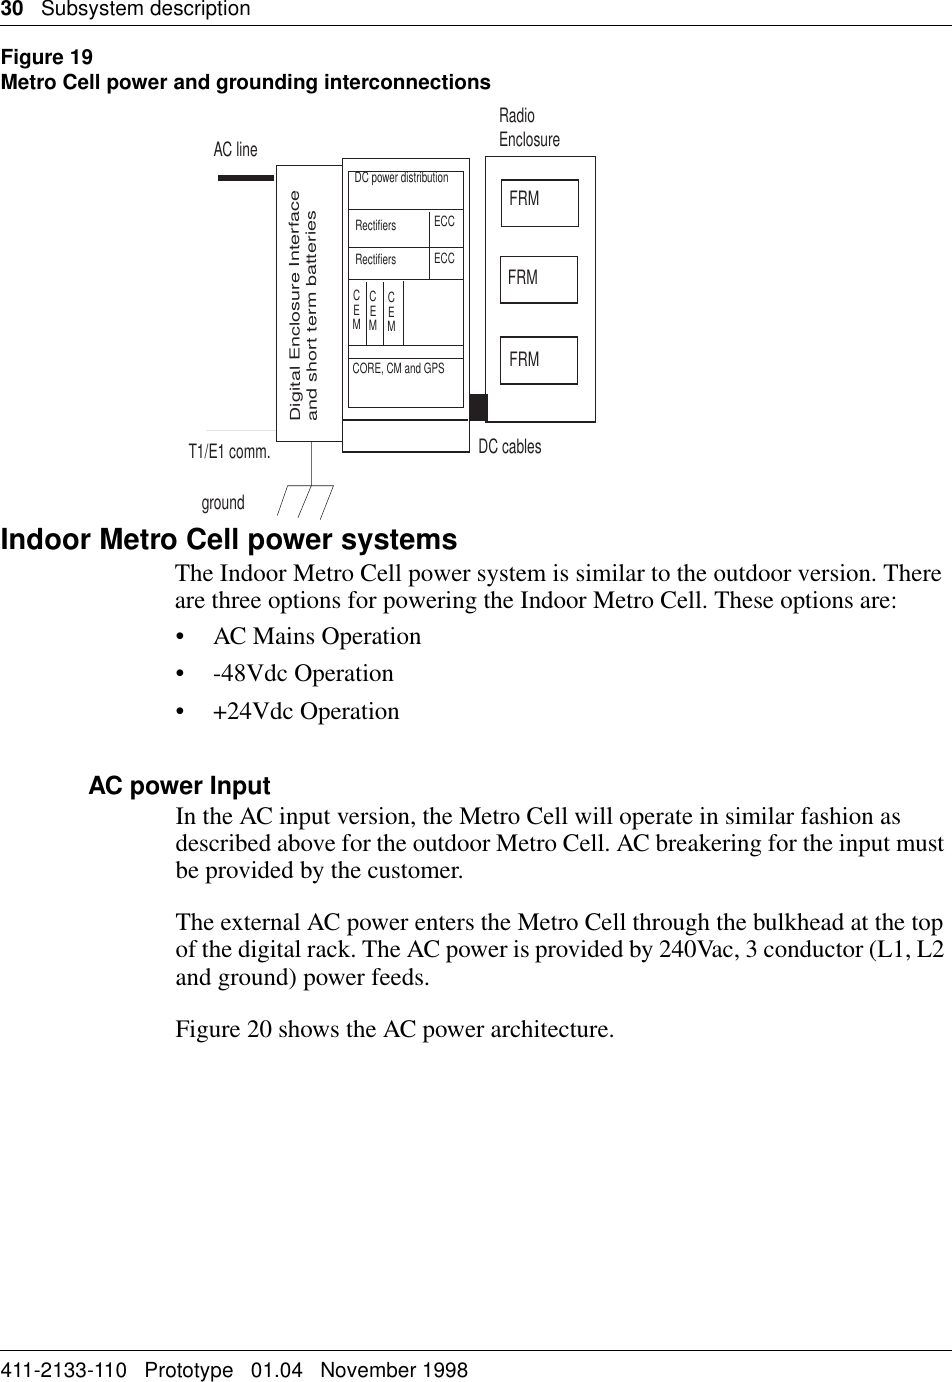 30   Subsystem description411-2133-110   Prototype   01.04   November 1998Figure 19Metro Cell power and grounding interconnectionsIndoor Metro Cell power systemsThe Indoor Metro Cell power system is similar to the outdoor version. There are three options for powering the Indoor Metro Cell. These options are:• AC Mains Operation• -48Vdc Operation• +24Vdc OperationAC power InputIn the AC input version, the Metro Cell will operate in similar fashion as described above for the outdoor Metro Cell. AC breakering for the input must be provided by the customer.The external AC power enters the Metro Cell through the bulkhead at the top of the digital rack. The AC power is provided by 240Vac, 3 conductor (L1, L2 and ground) power feeds. Figure 20 shows the AC power architecture.AC lineFRMFRMFRMDC cablesT1/E1 comm.groundDigital Enclosure Interfaceand short term batteriesRadioEnclosureDC power distributionRectifiersRectifiersECCECCCEMCEMCEMCORE, CM and GPS